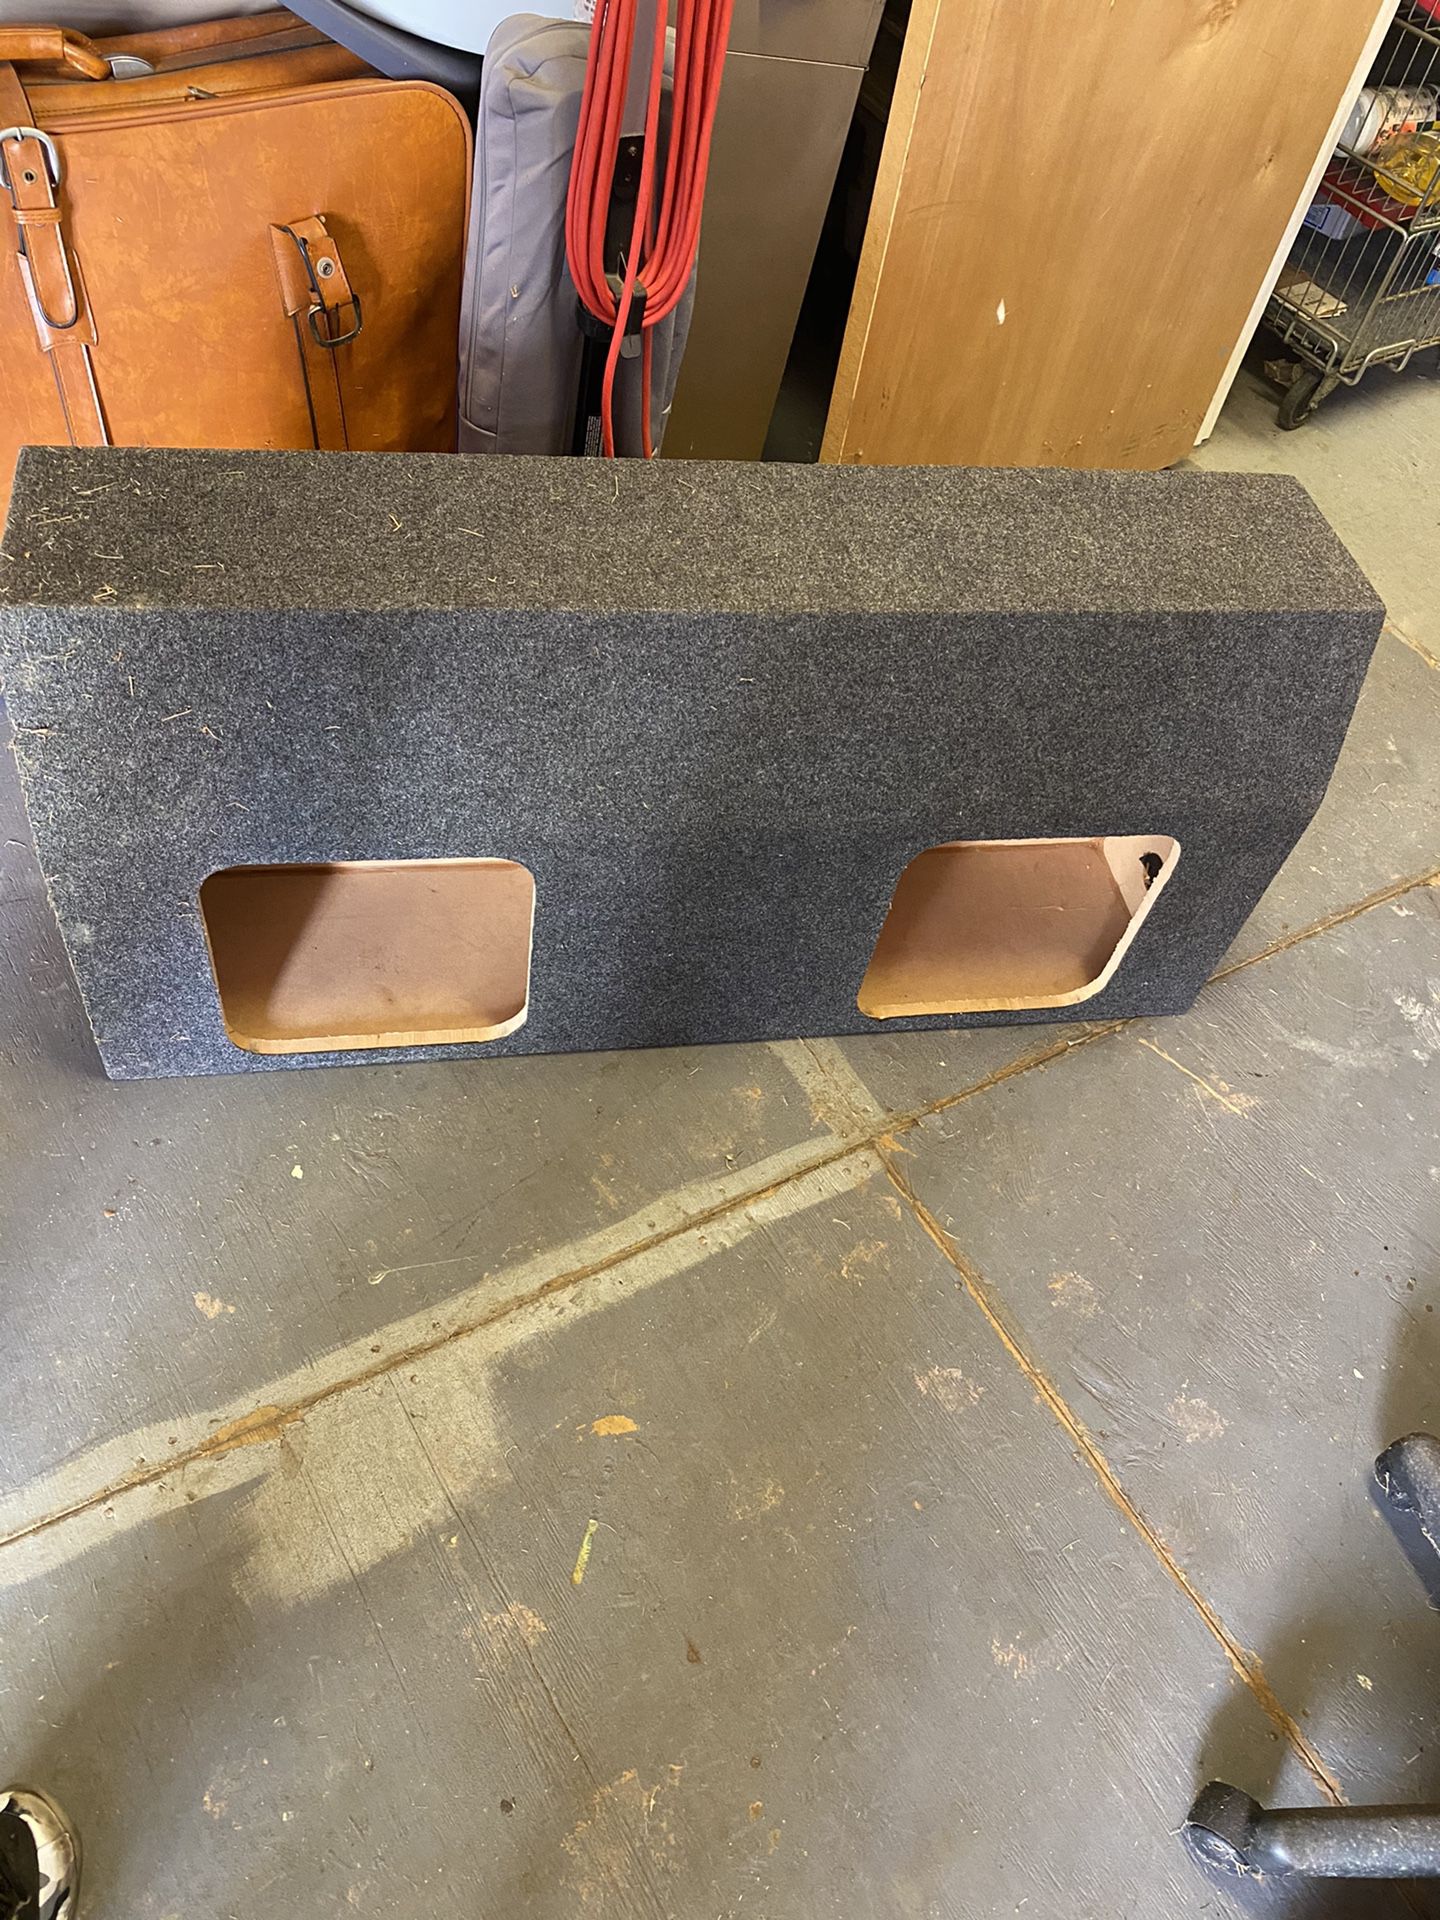 Empty Subwoofer box for (2) 12 inch squares subwoofers.